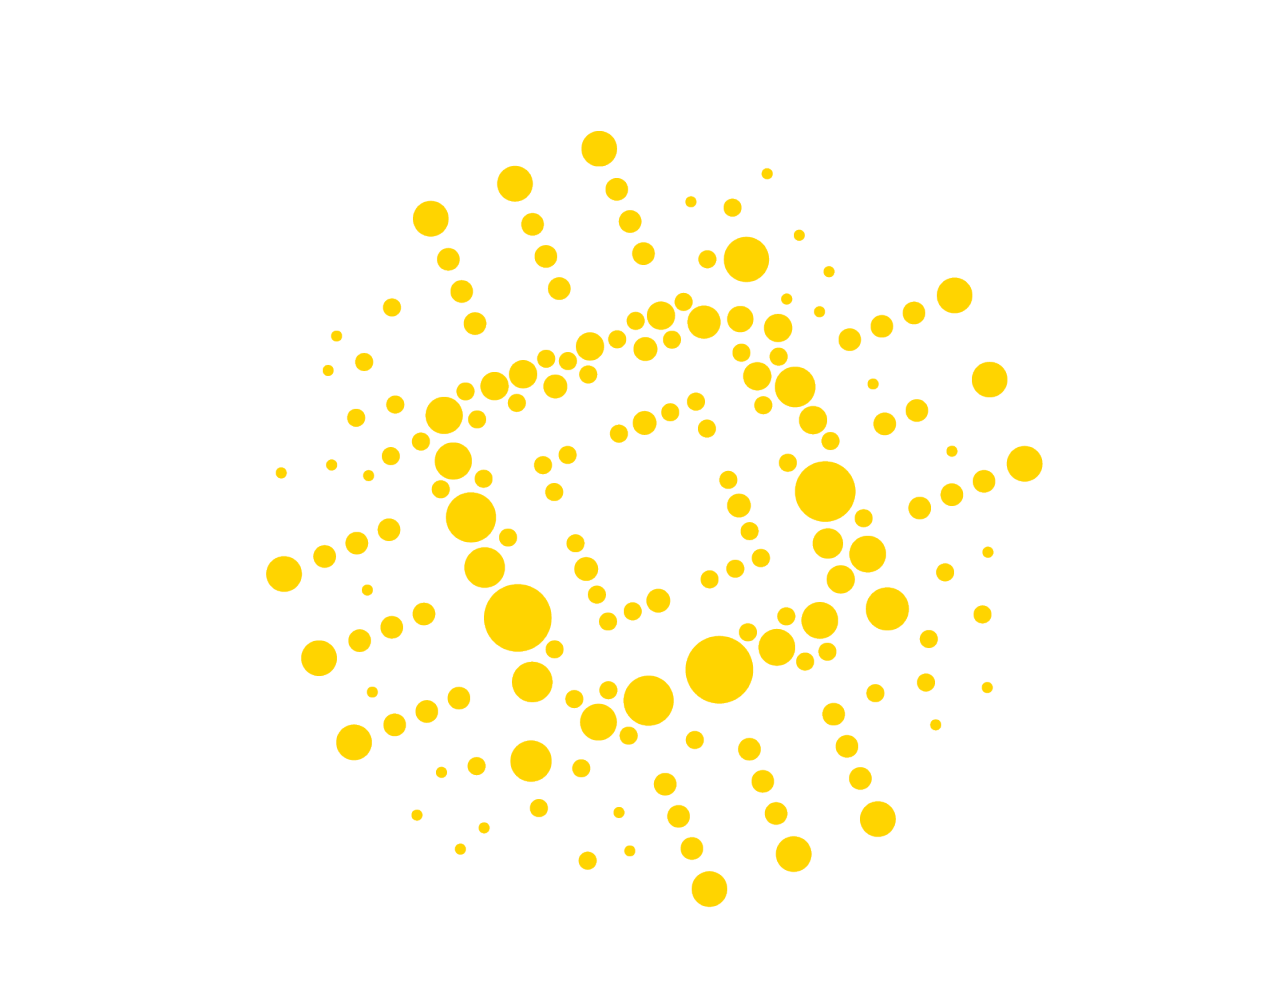 Yellow circles form the shape of a microchip